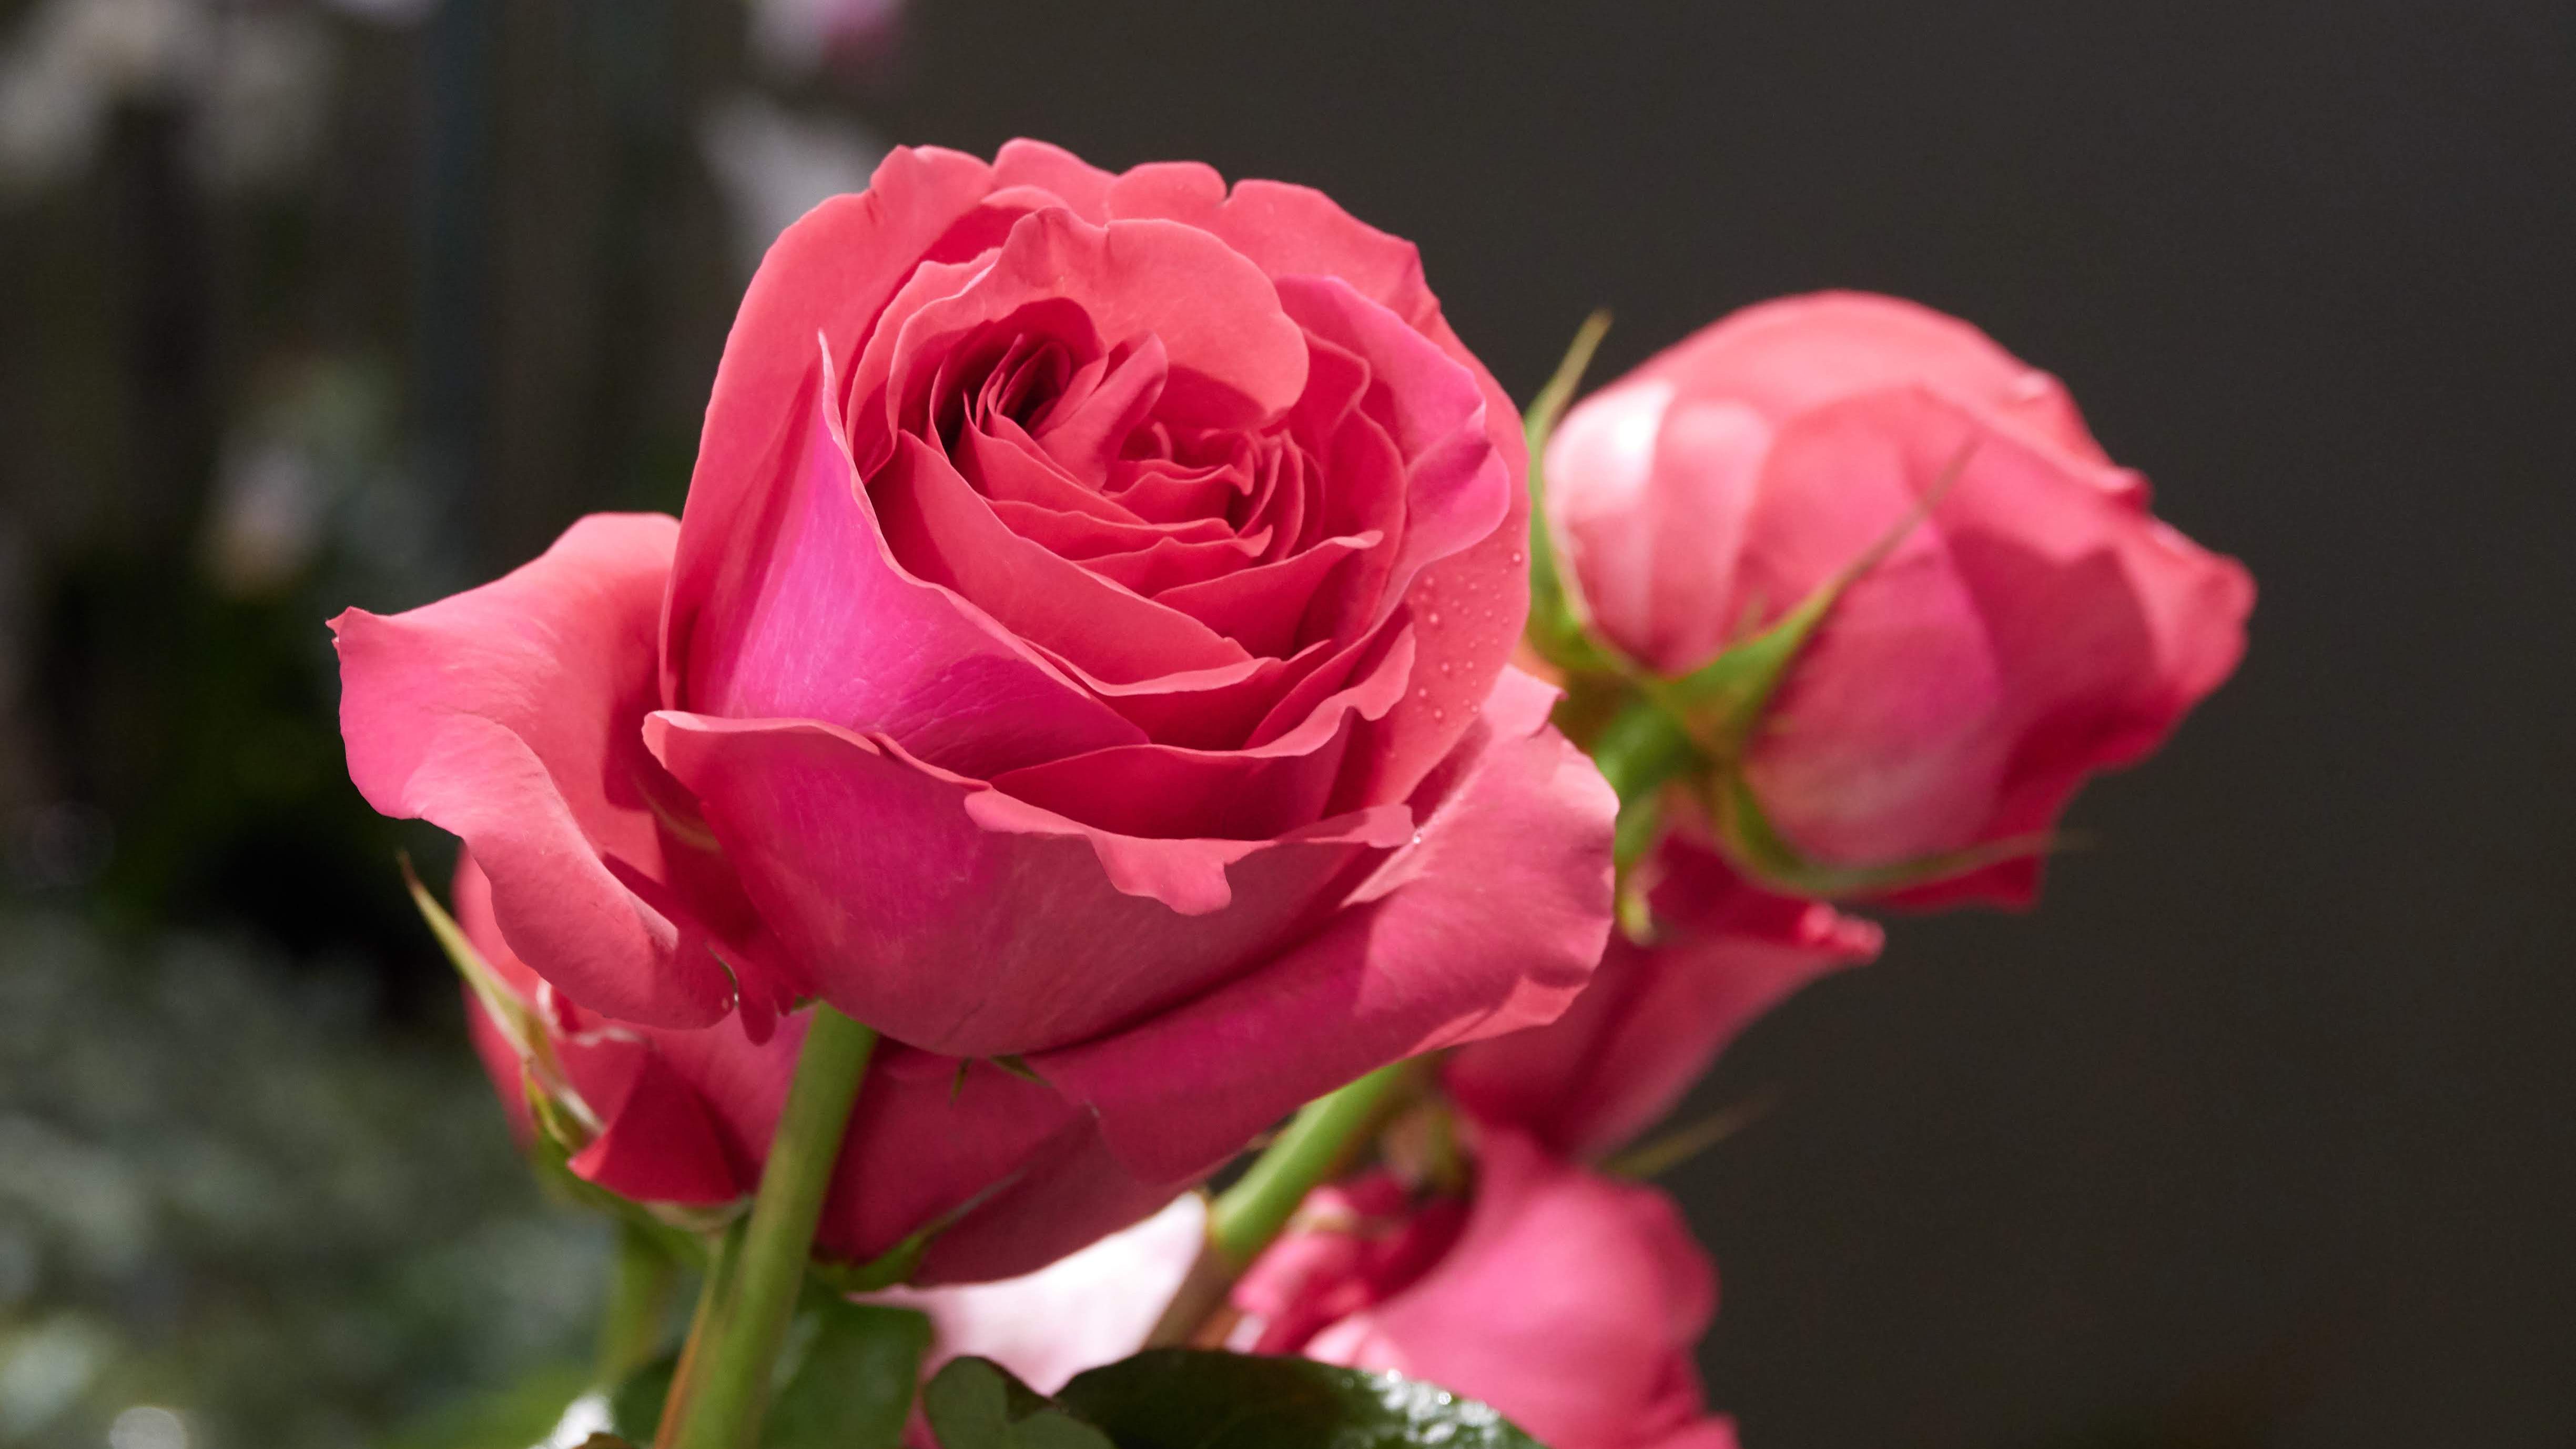 Over 10 million roses imported on Valentine's Day in 2018.